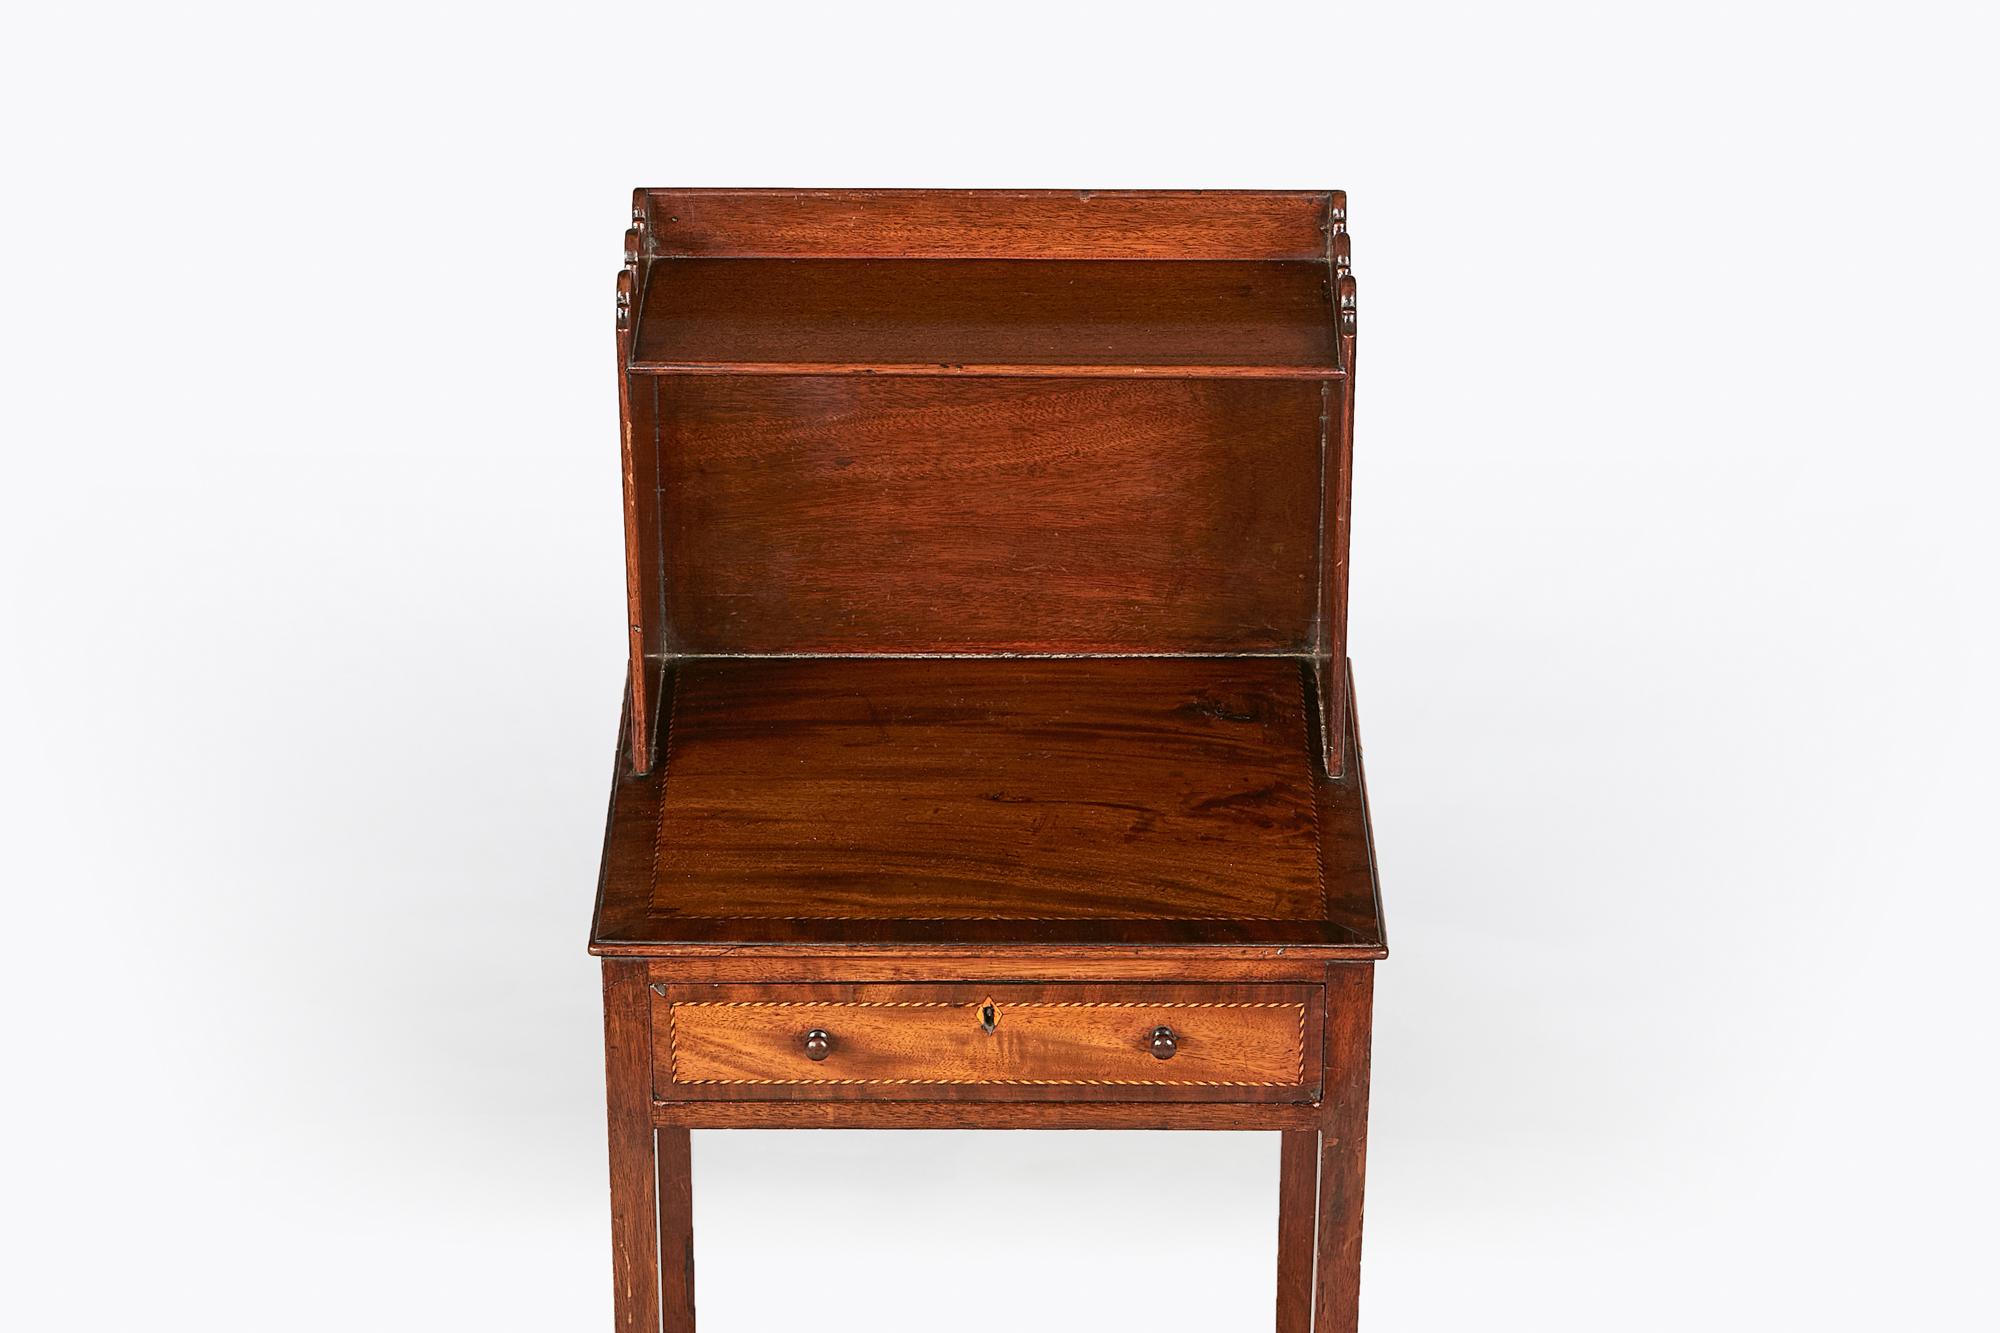 18th century George III mahogany book/side table, the moulded shaped top above single shelf raised over single line inlaid drawer supported over Marlborough leg joined by shaped concave stretcher.